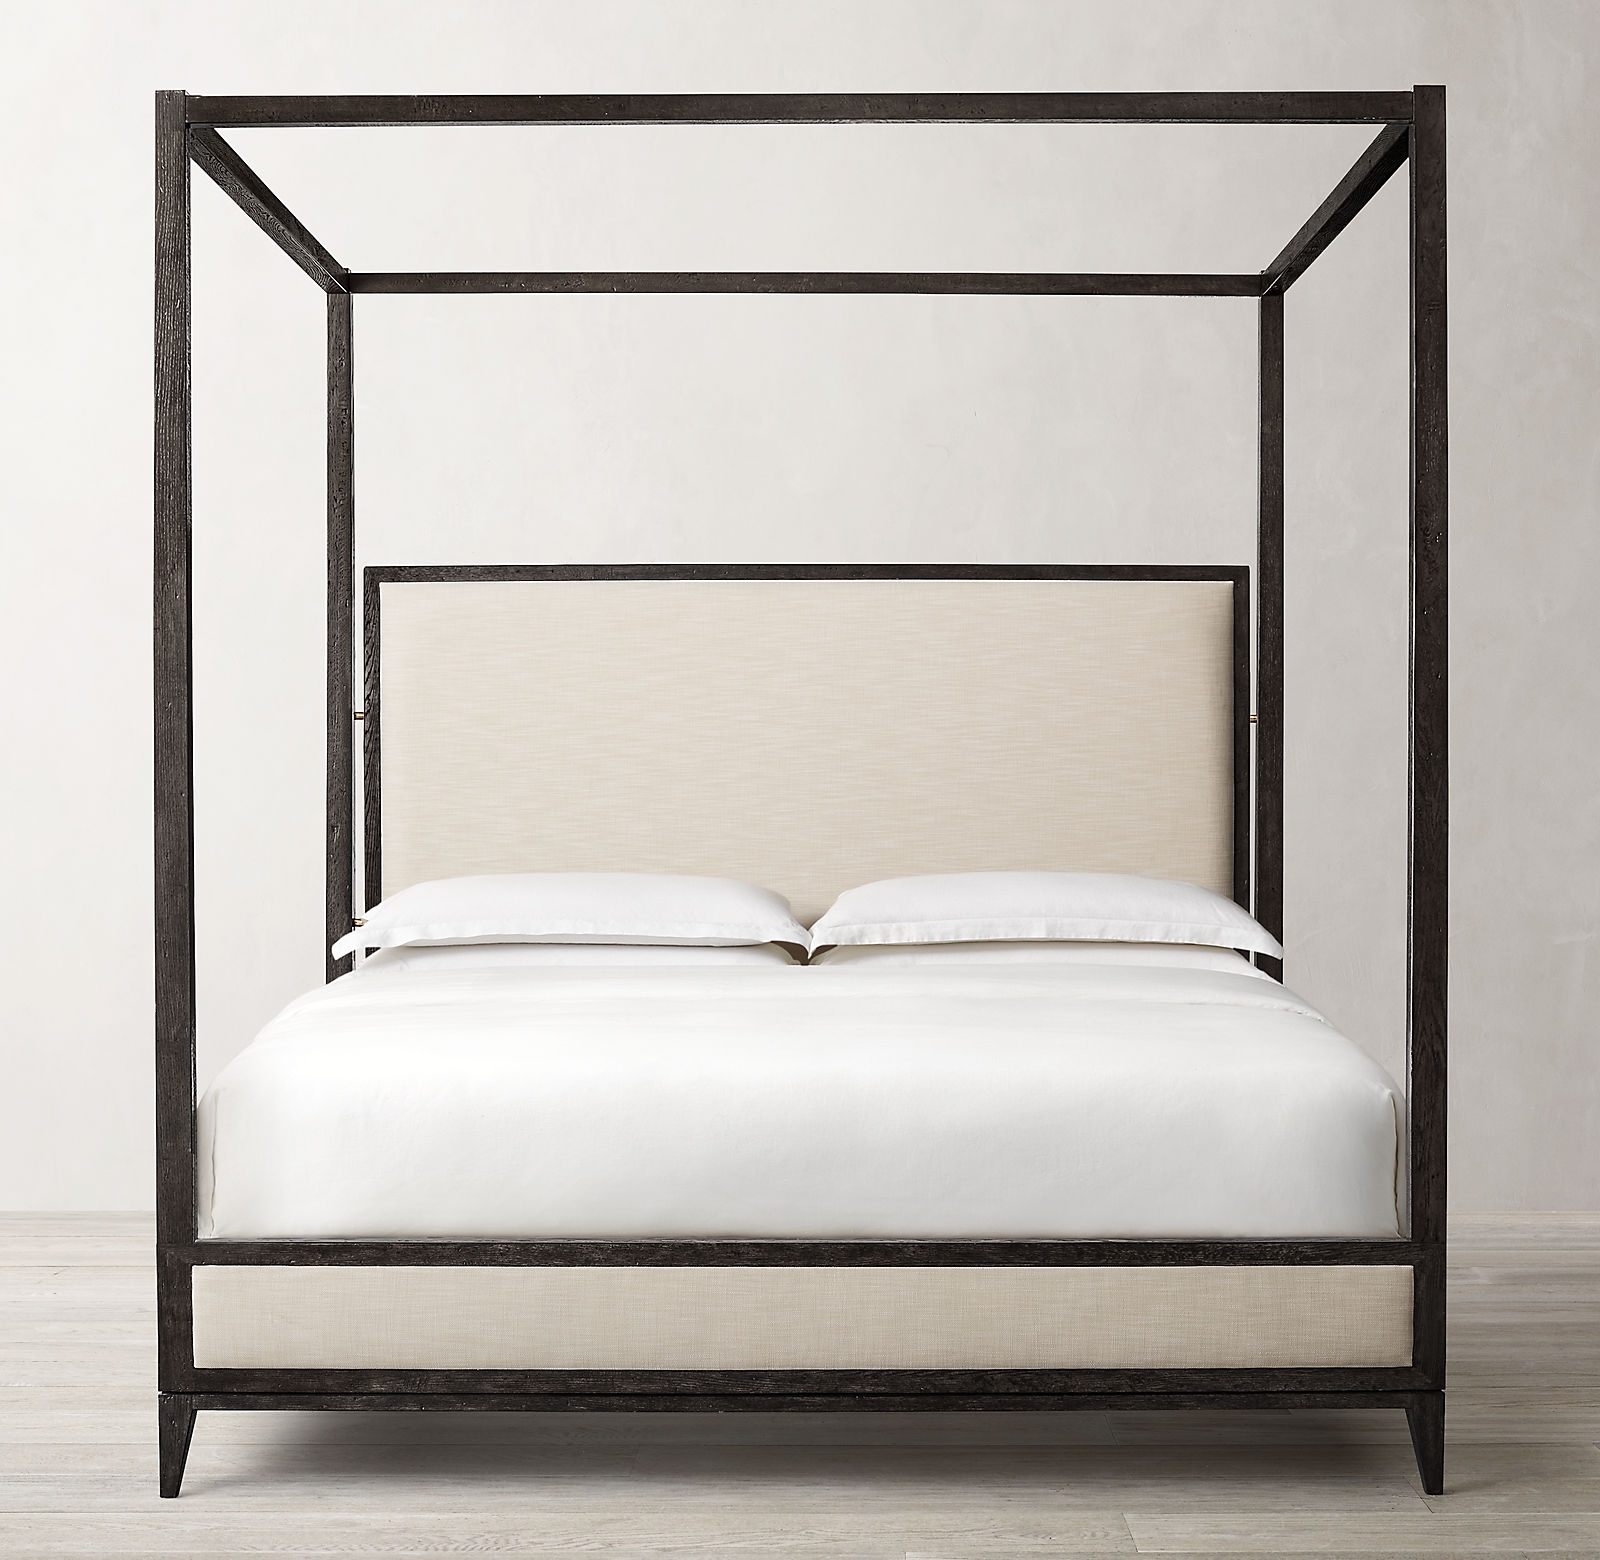 CAYDEN CAMPAIGN CANOPY FABRIC BED - 90"H bed shown in Sand Belgian Linen with Waxed Black Oak finish. - Image 0